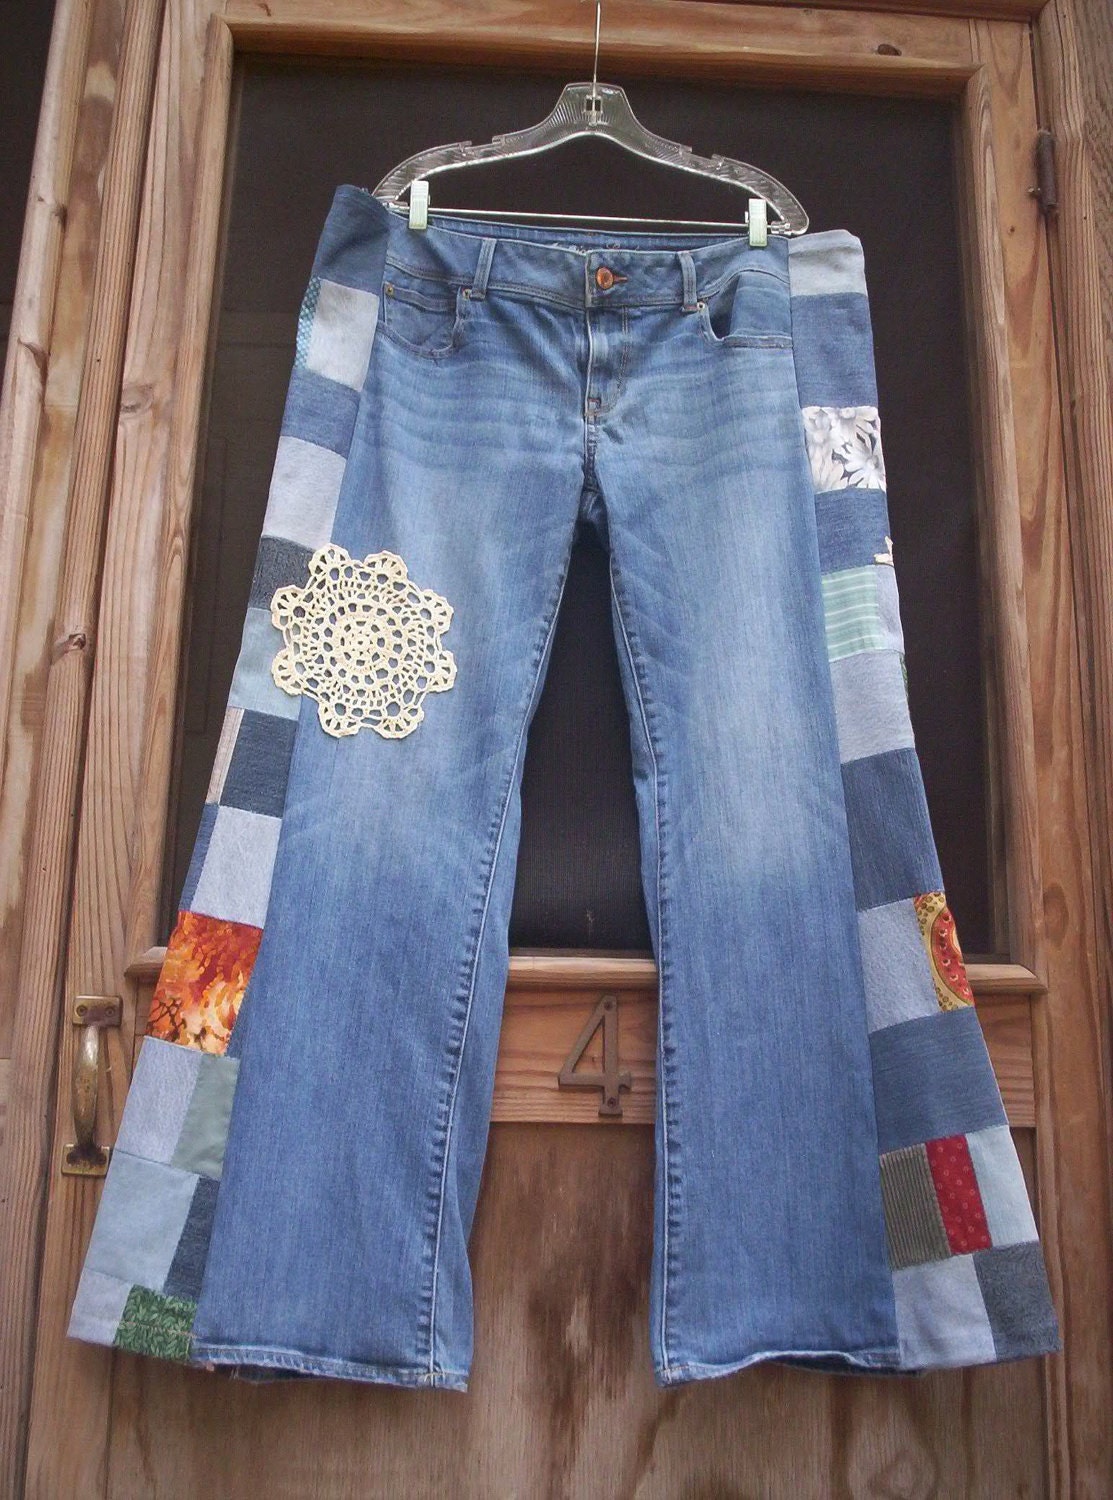 BELL PATCHWORK PANTS Hippie Bell Bottoms Jeans Doily n Daisy